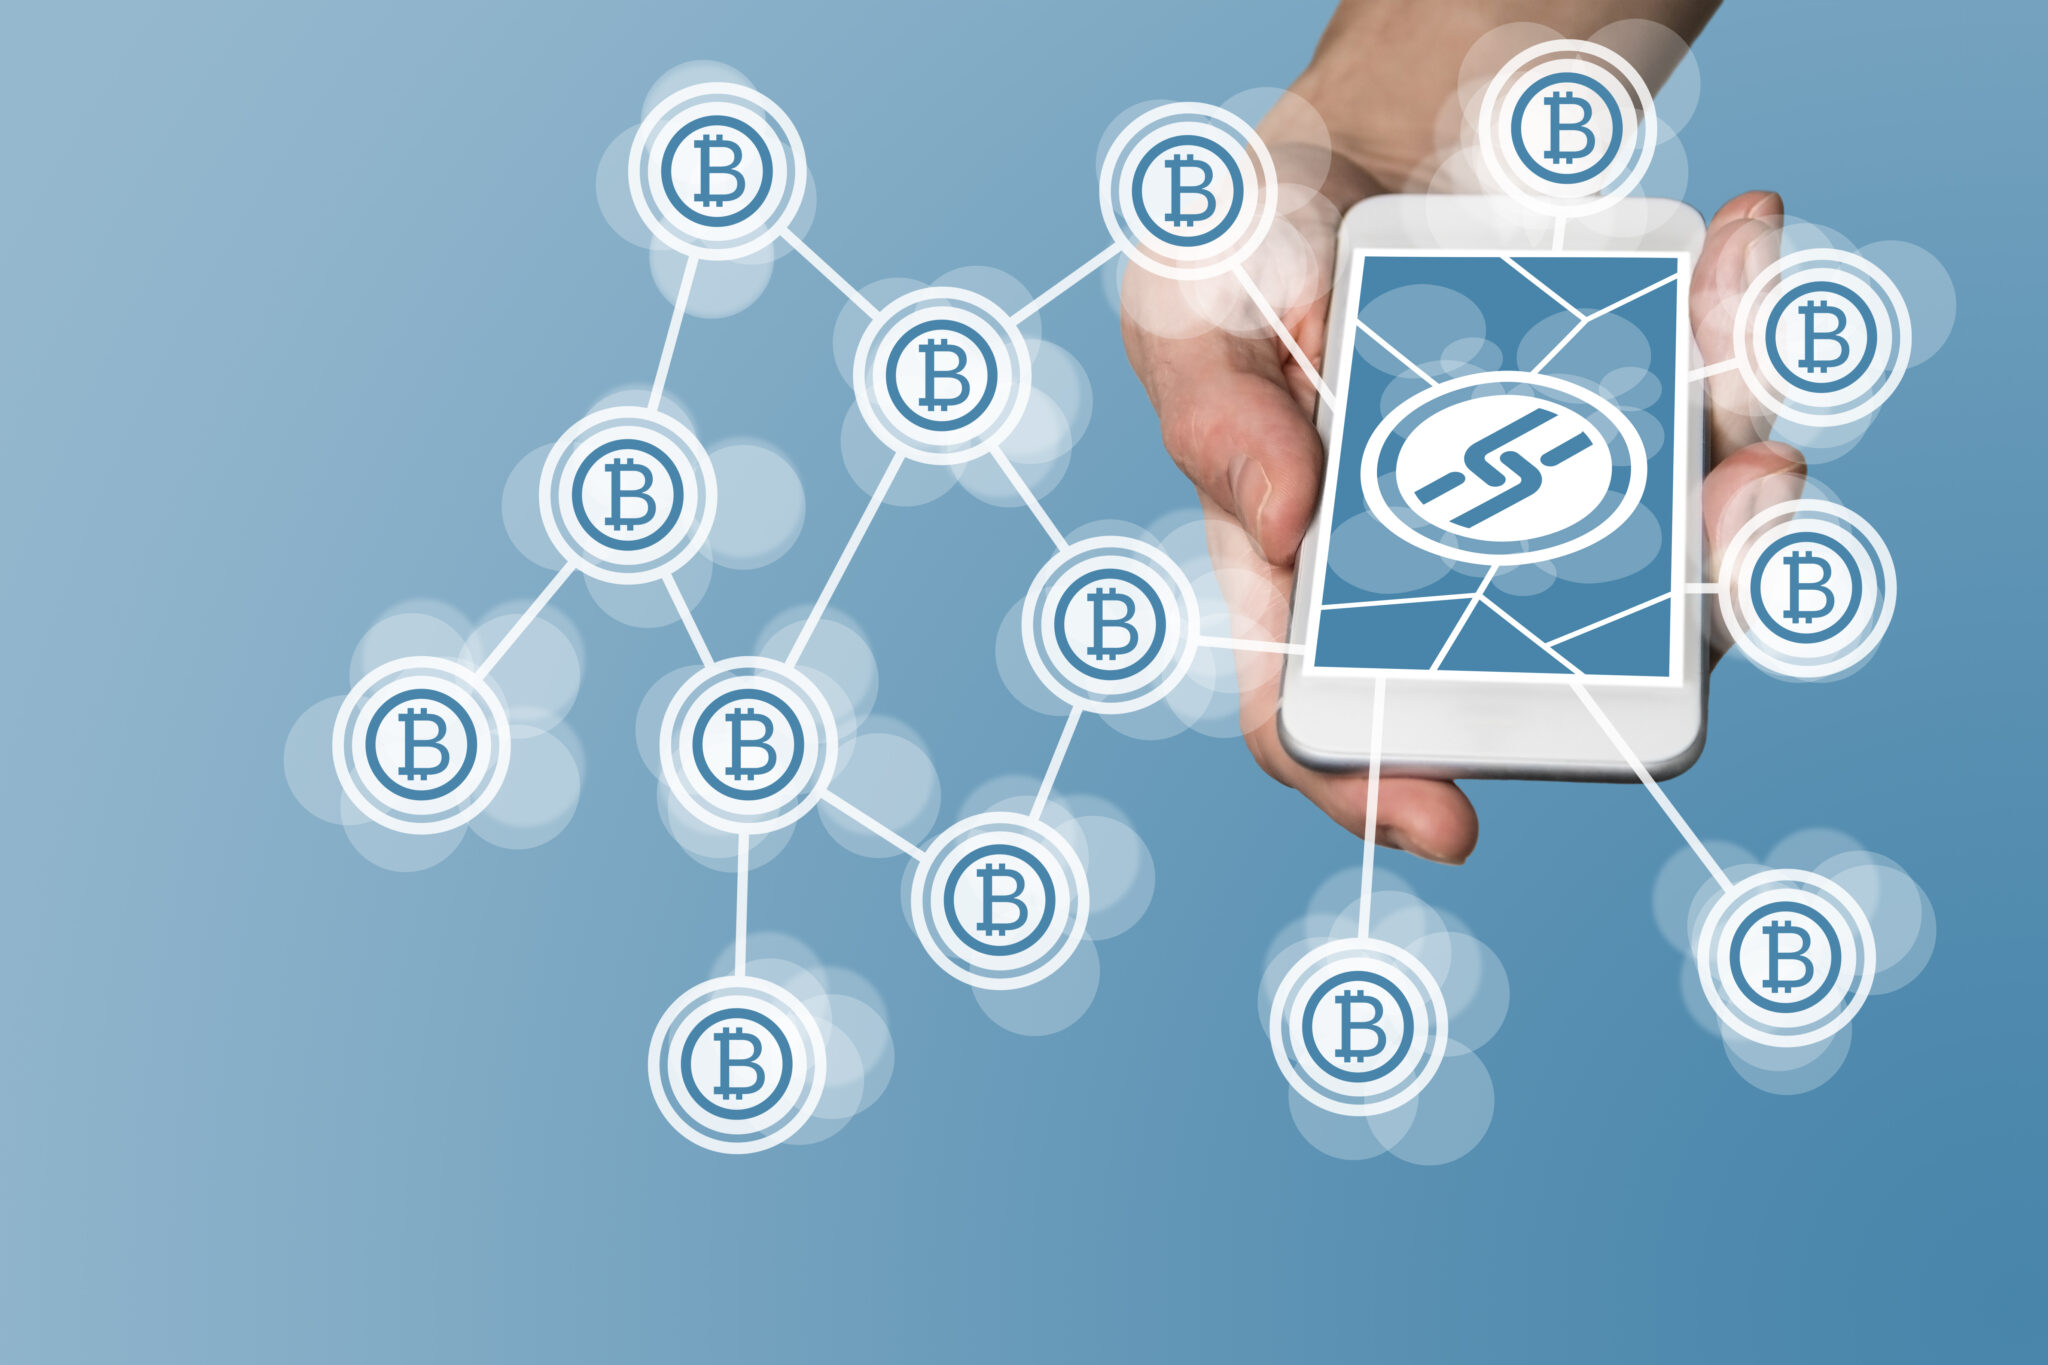 Concept of blockchain and bitcoin with a modern smartphone holding hand as an example for the technology of fin technology